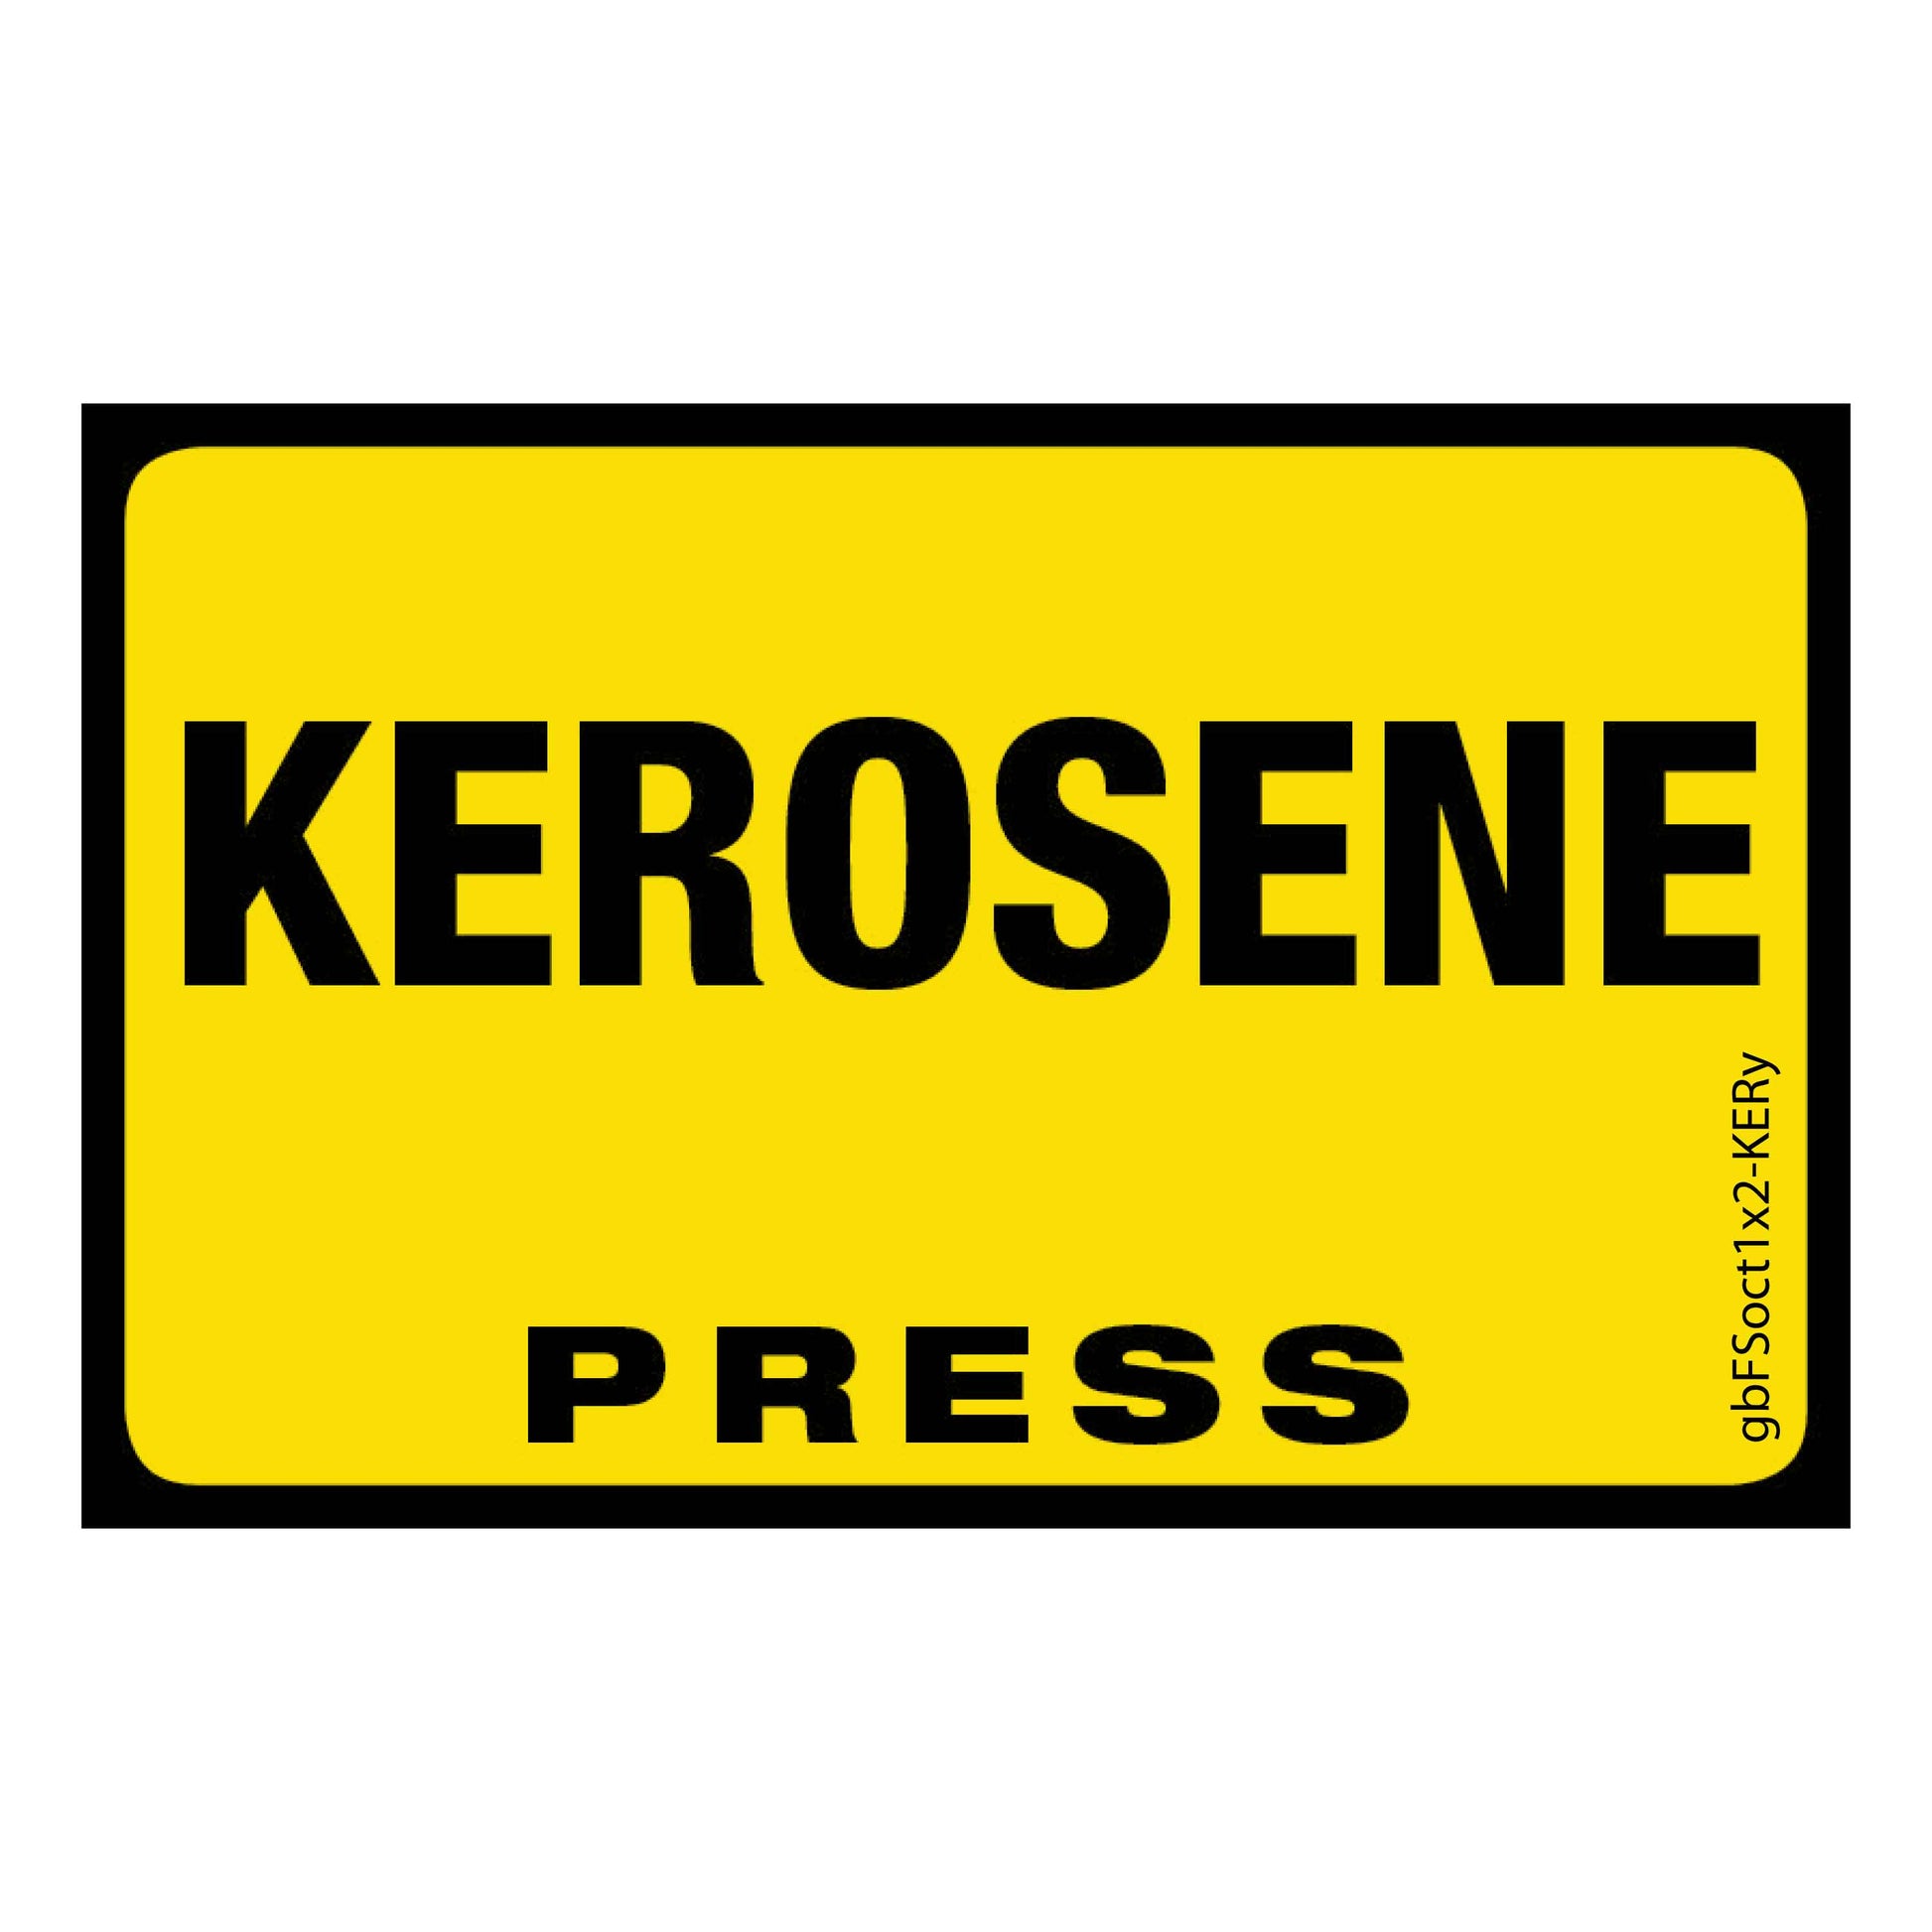 Kerosene Press Octane Rating Decal, Yellow. 1 inch by 2 inches in size.